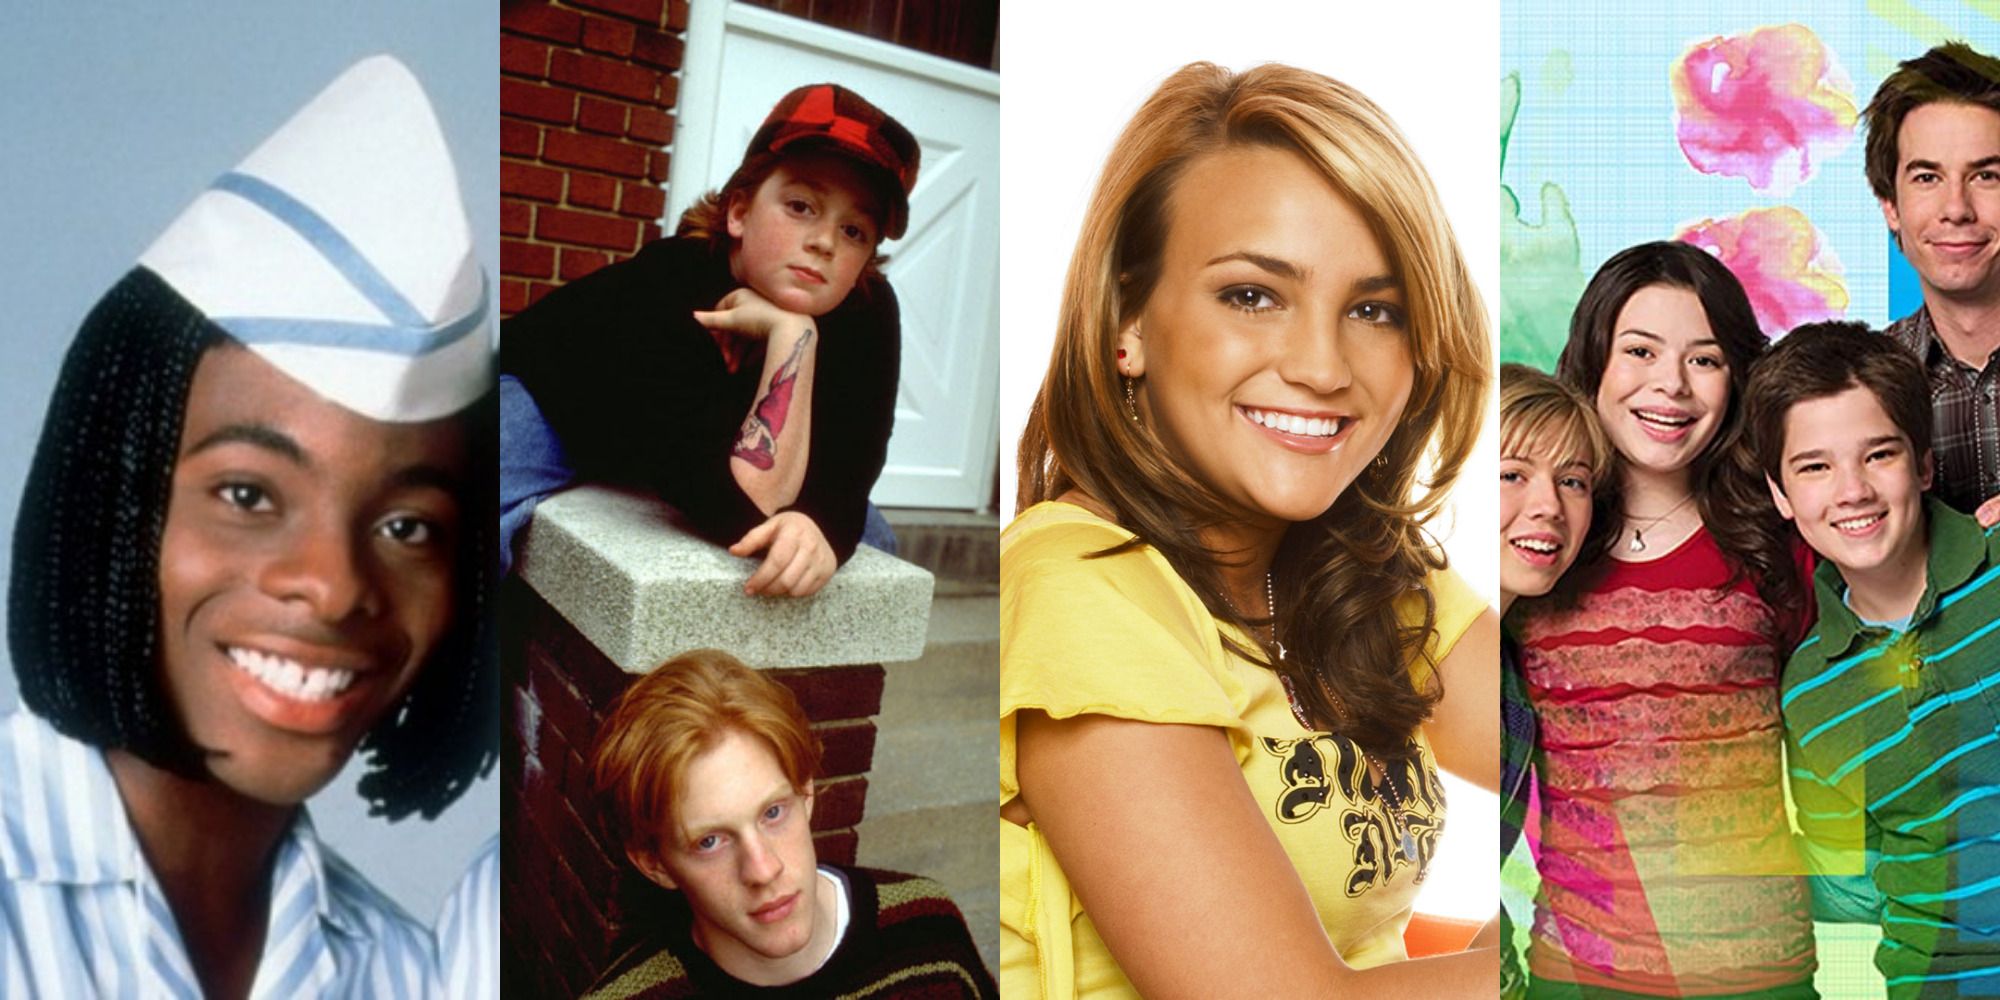 10 Live Action Nickelodeon Shows That Will Make You Feel Nostalgic